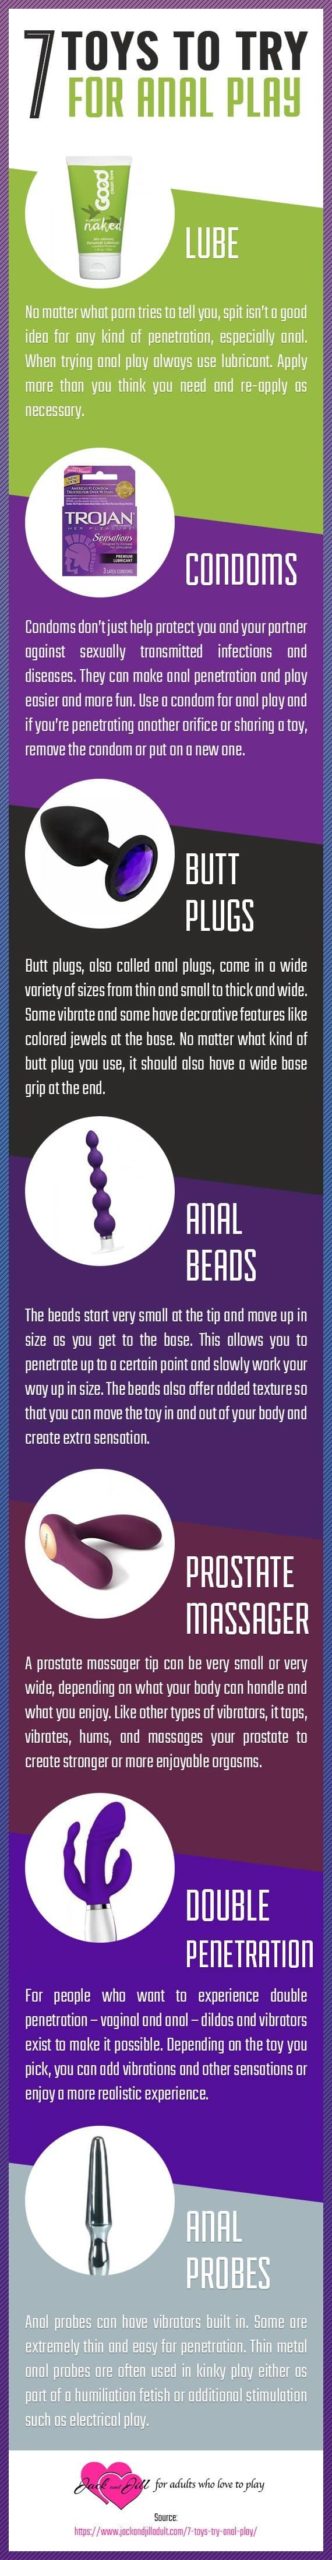 Infographic for 7 Toys You Need to Try for Anal